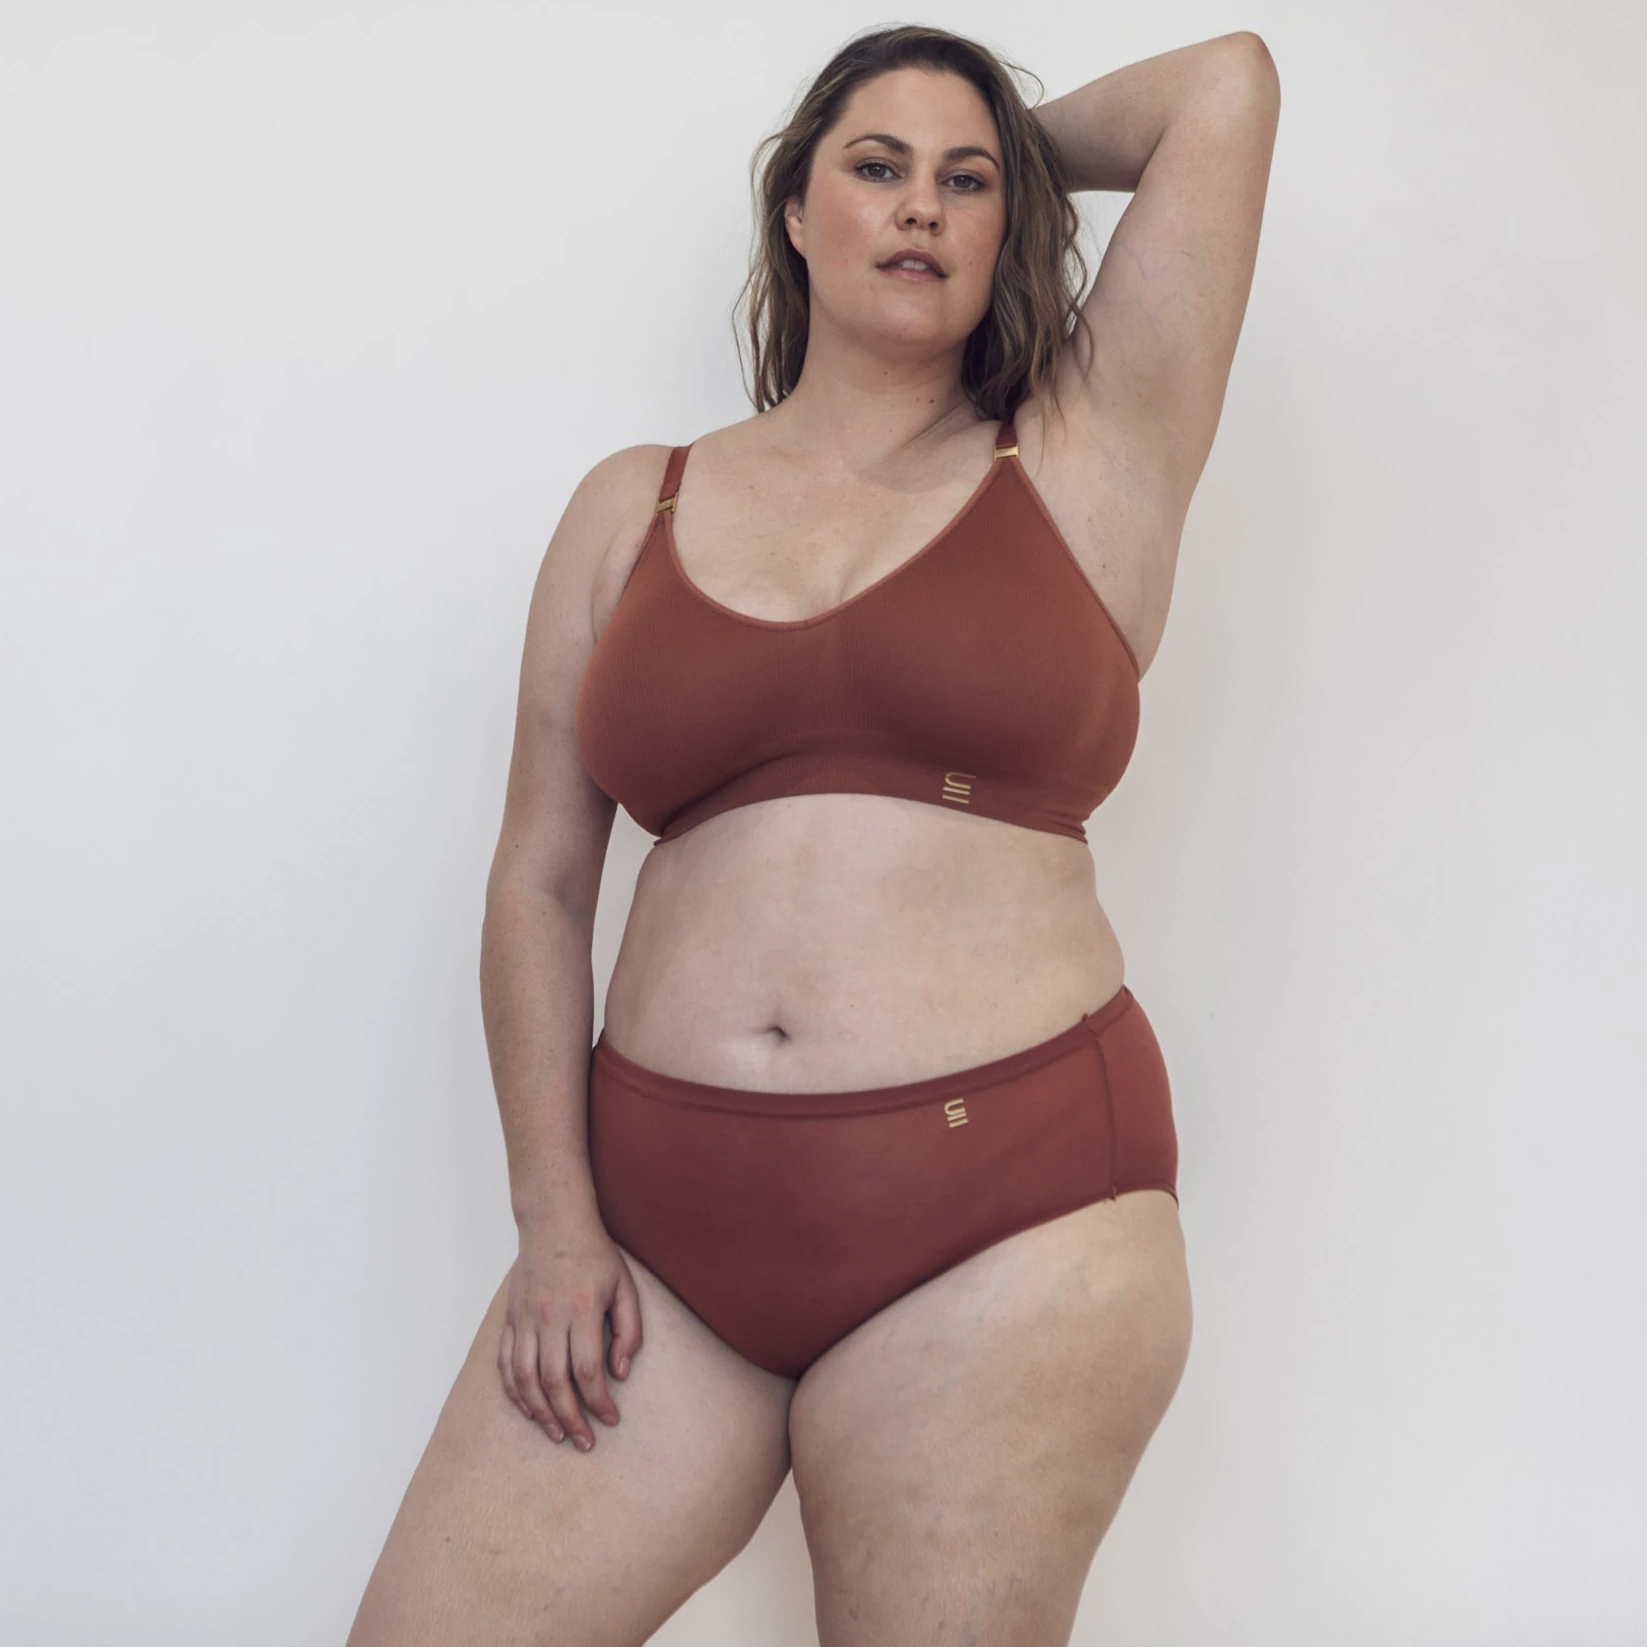 Lingerie for the Real Size Women - LatinTRENDS